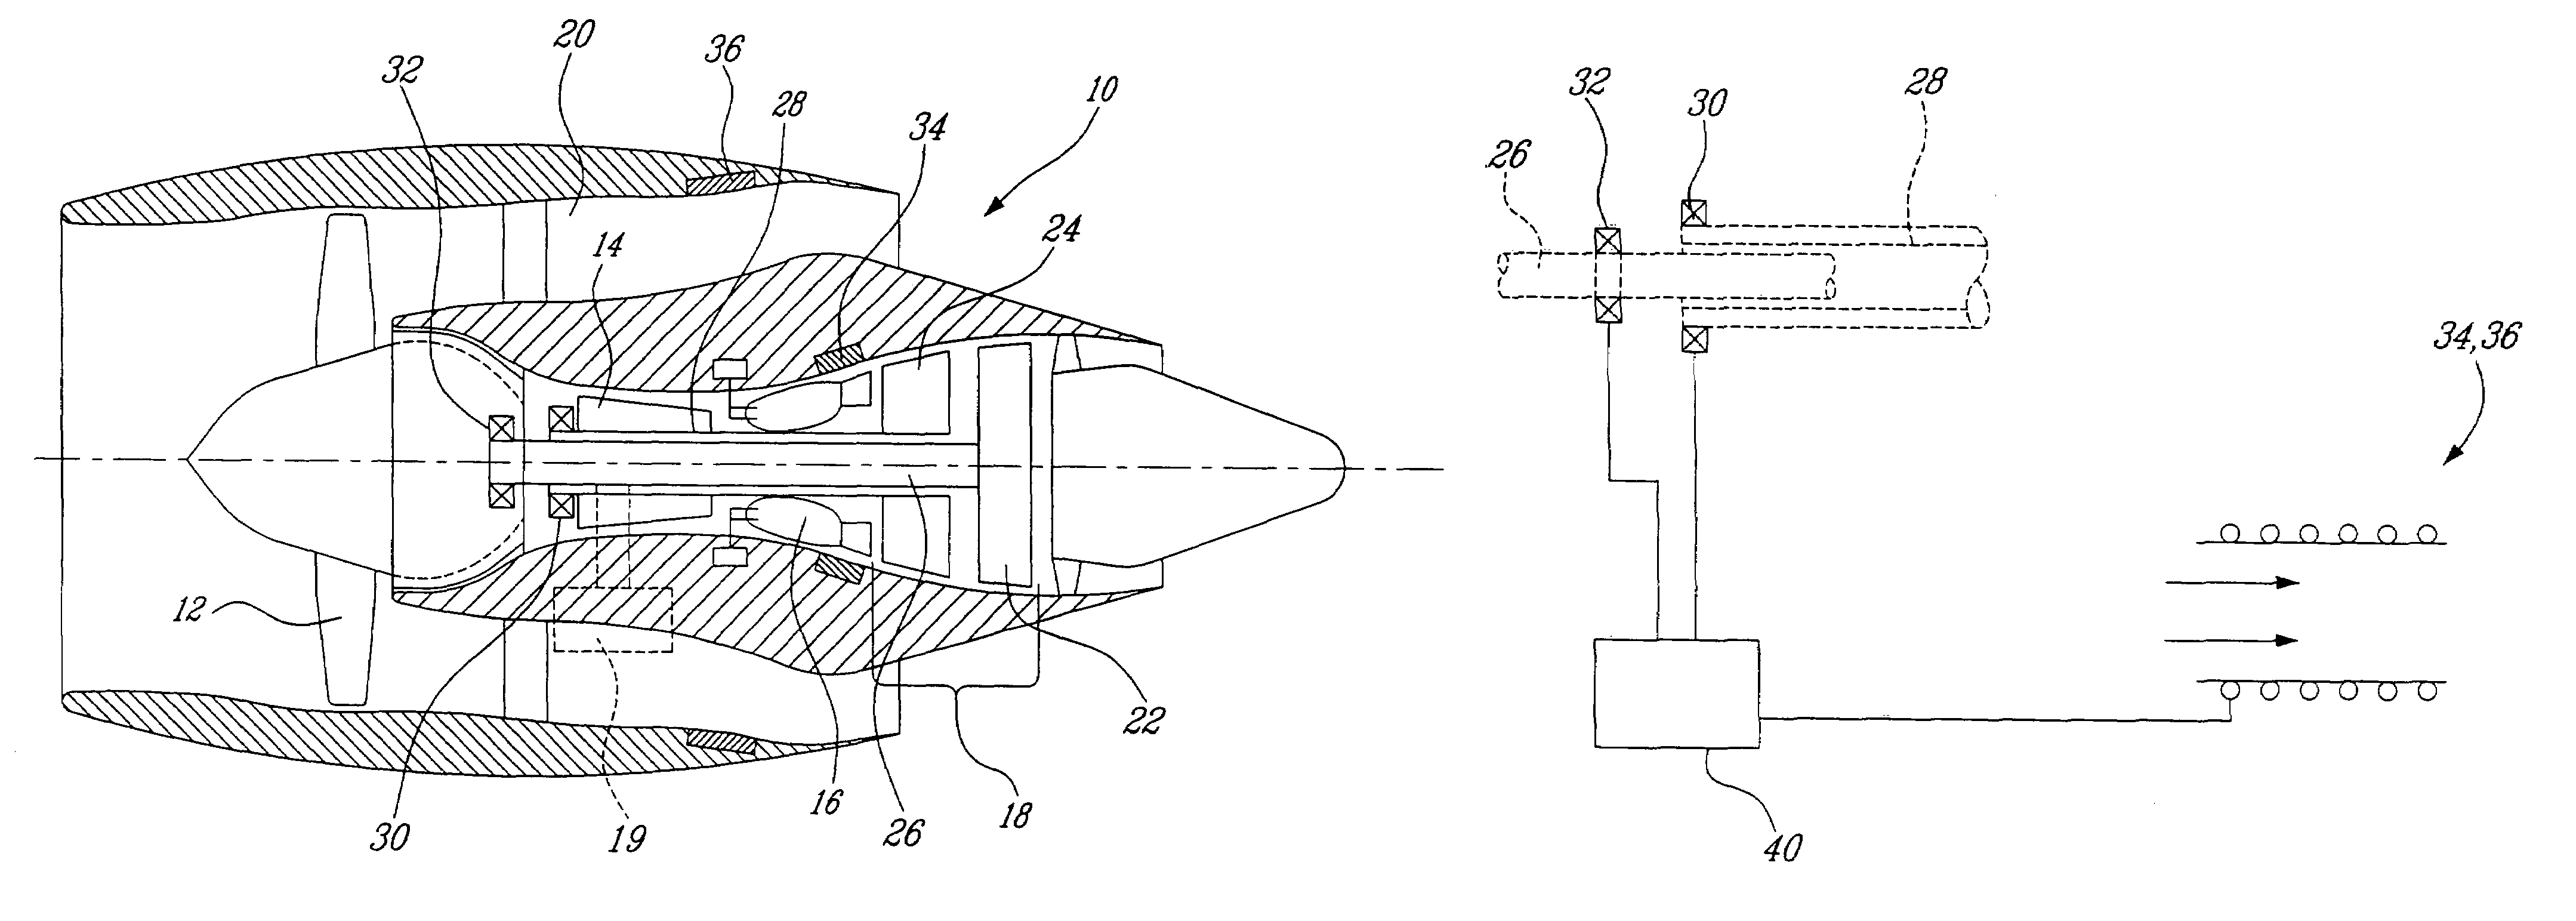 Gas turbine engine including apparatus to transfer power between multiple shafts